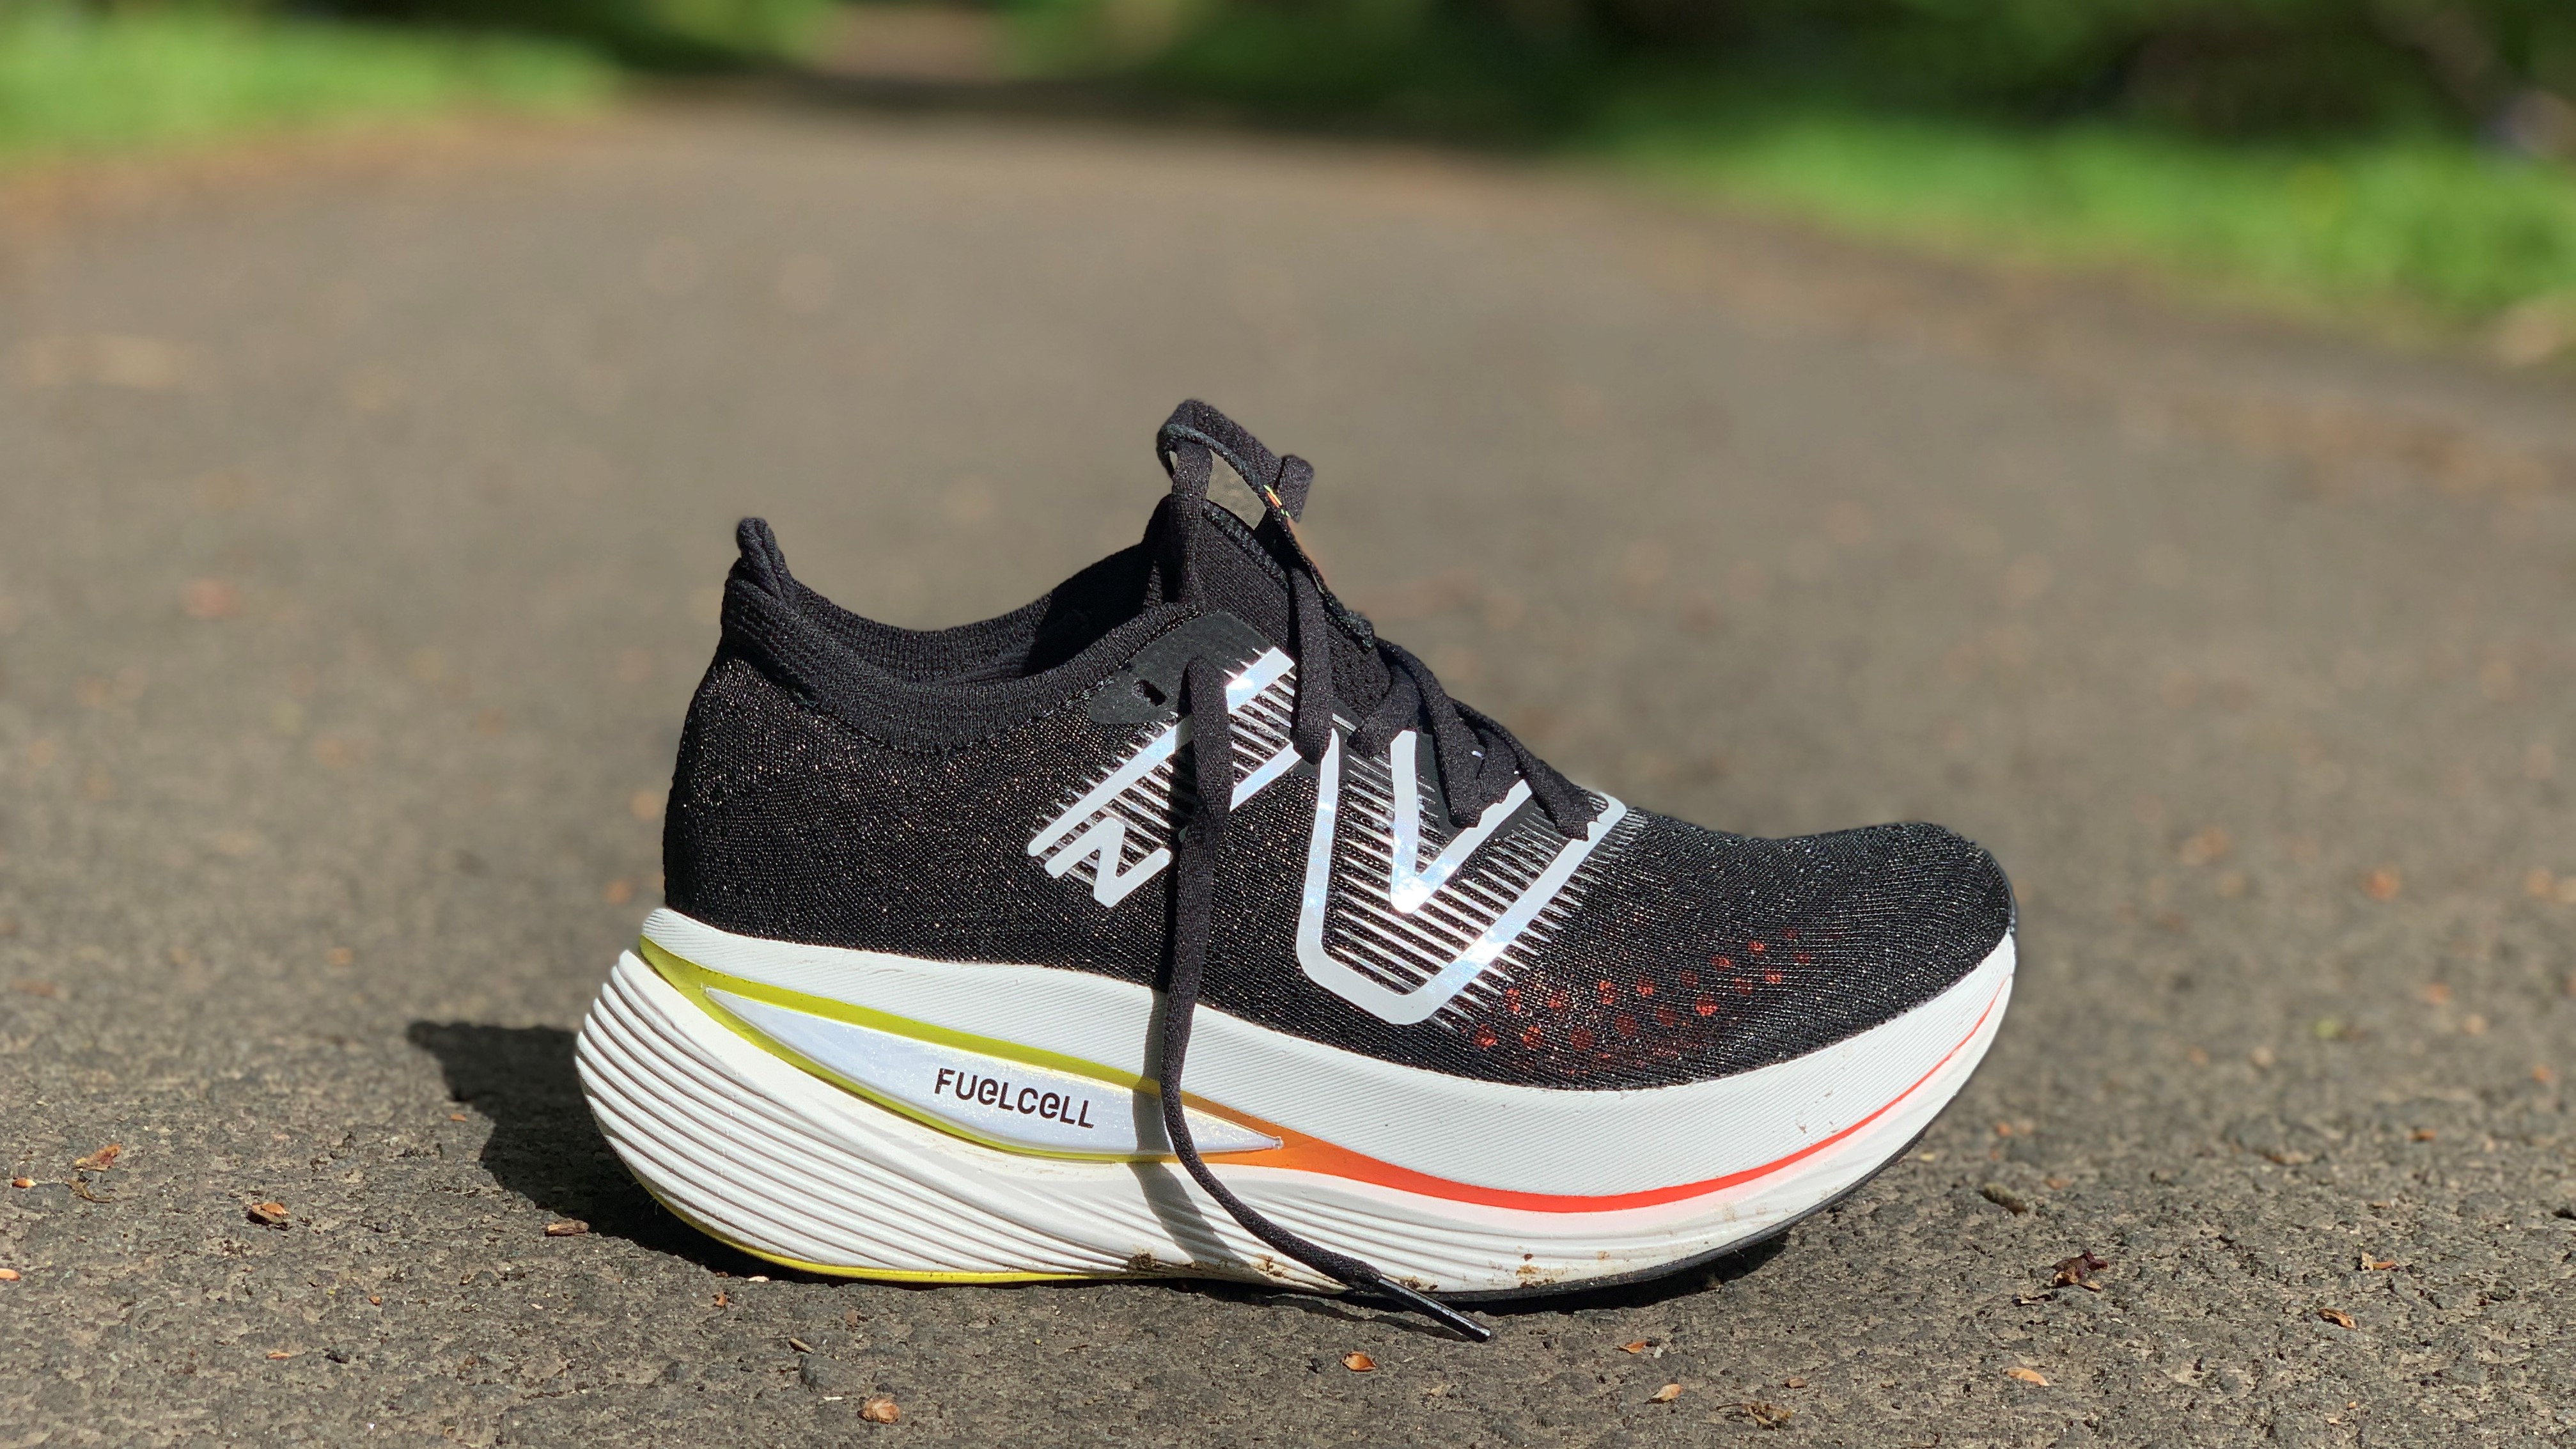 New Balance Fuelcell Supercomp Trainer review: like running on trampolines